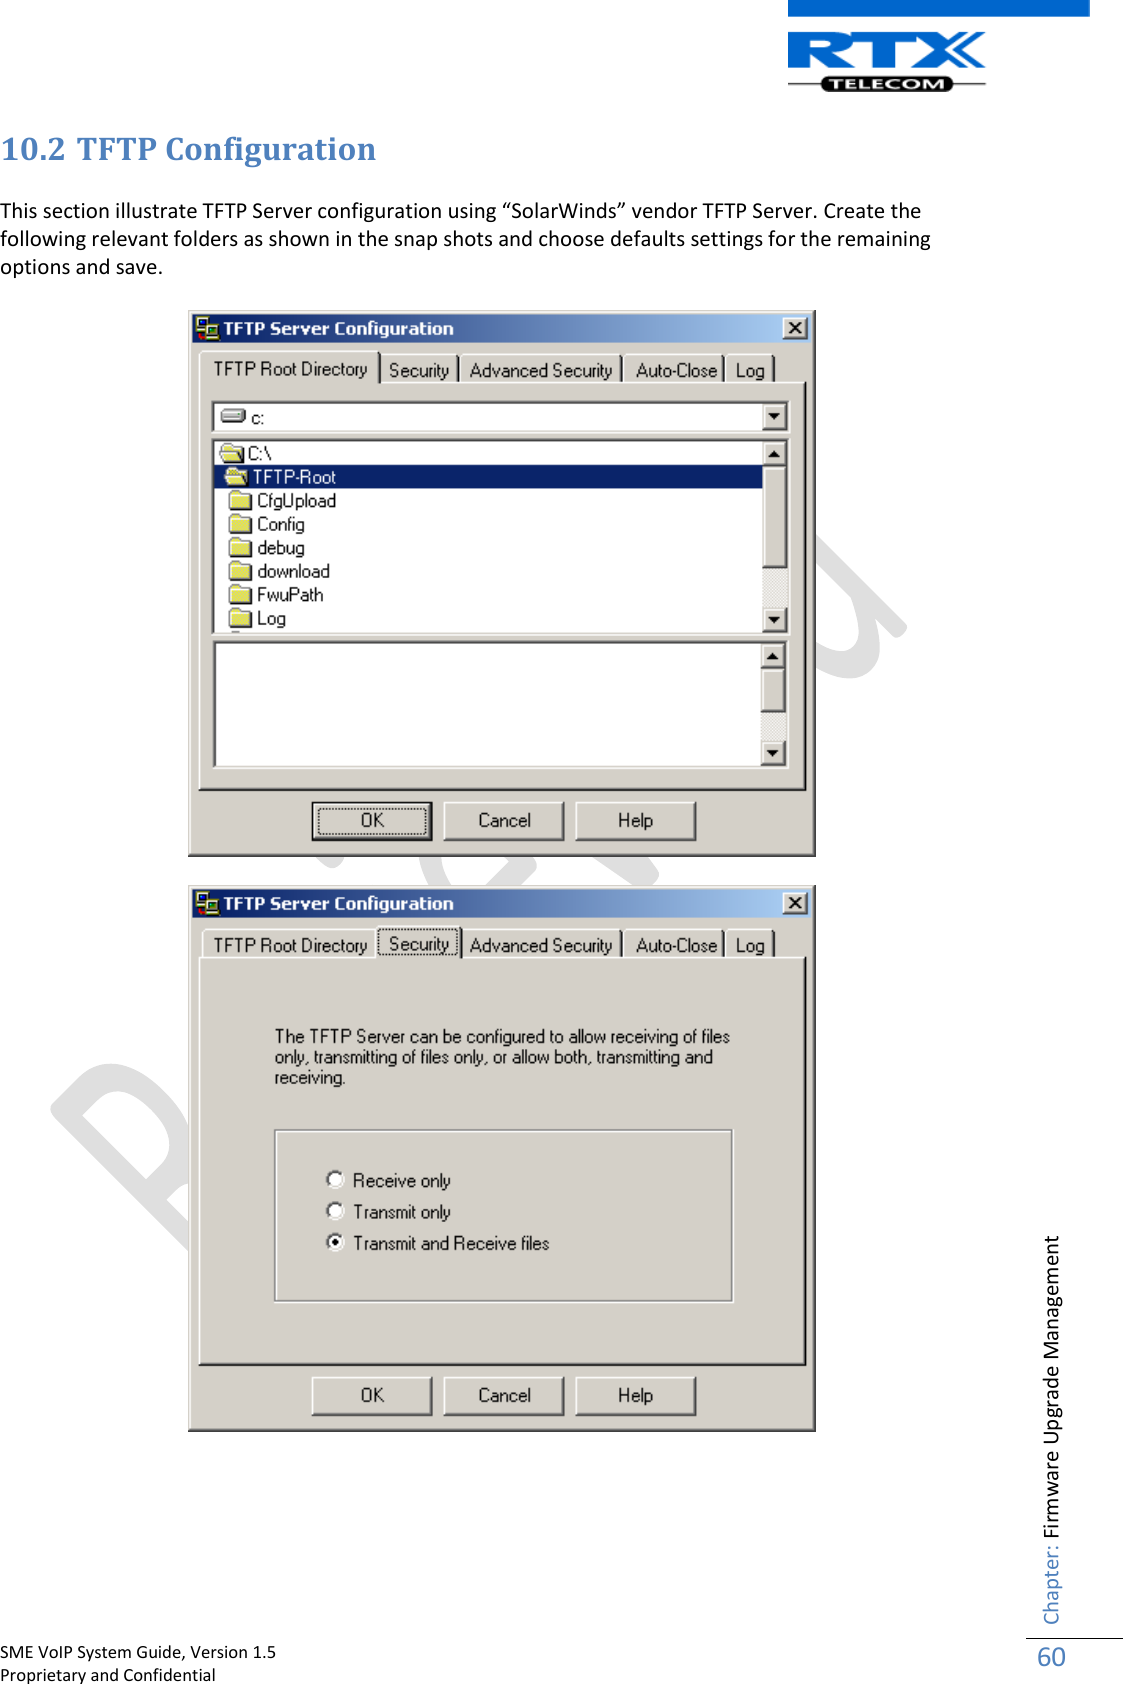    SME VoIP System Guide, Version 1.5                                                                                                                                                          Proprietary and Confidential    Chapter: Firmware Upgrade Management 60  10.2 TFTP Configuration This section illustrate TFTP Server configuration using “SolarWinds” vendor TFTP Server. Create the following relevant folders as shown in the snap shots and choose defaults settings for the remaining options and save.     